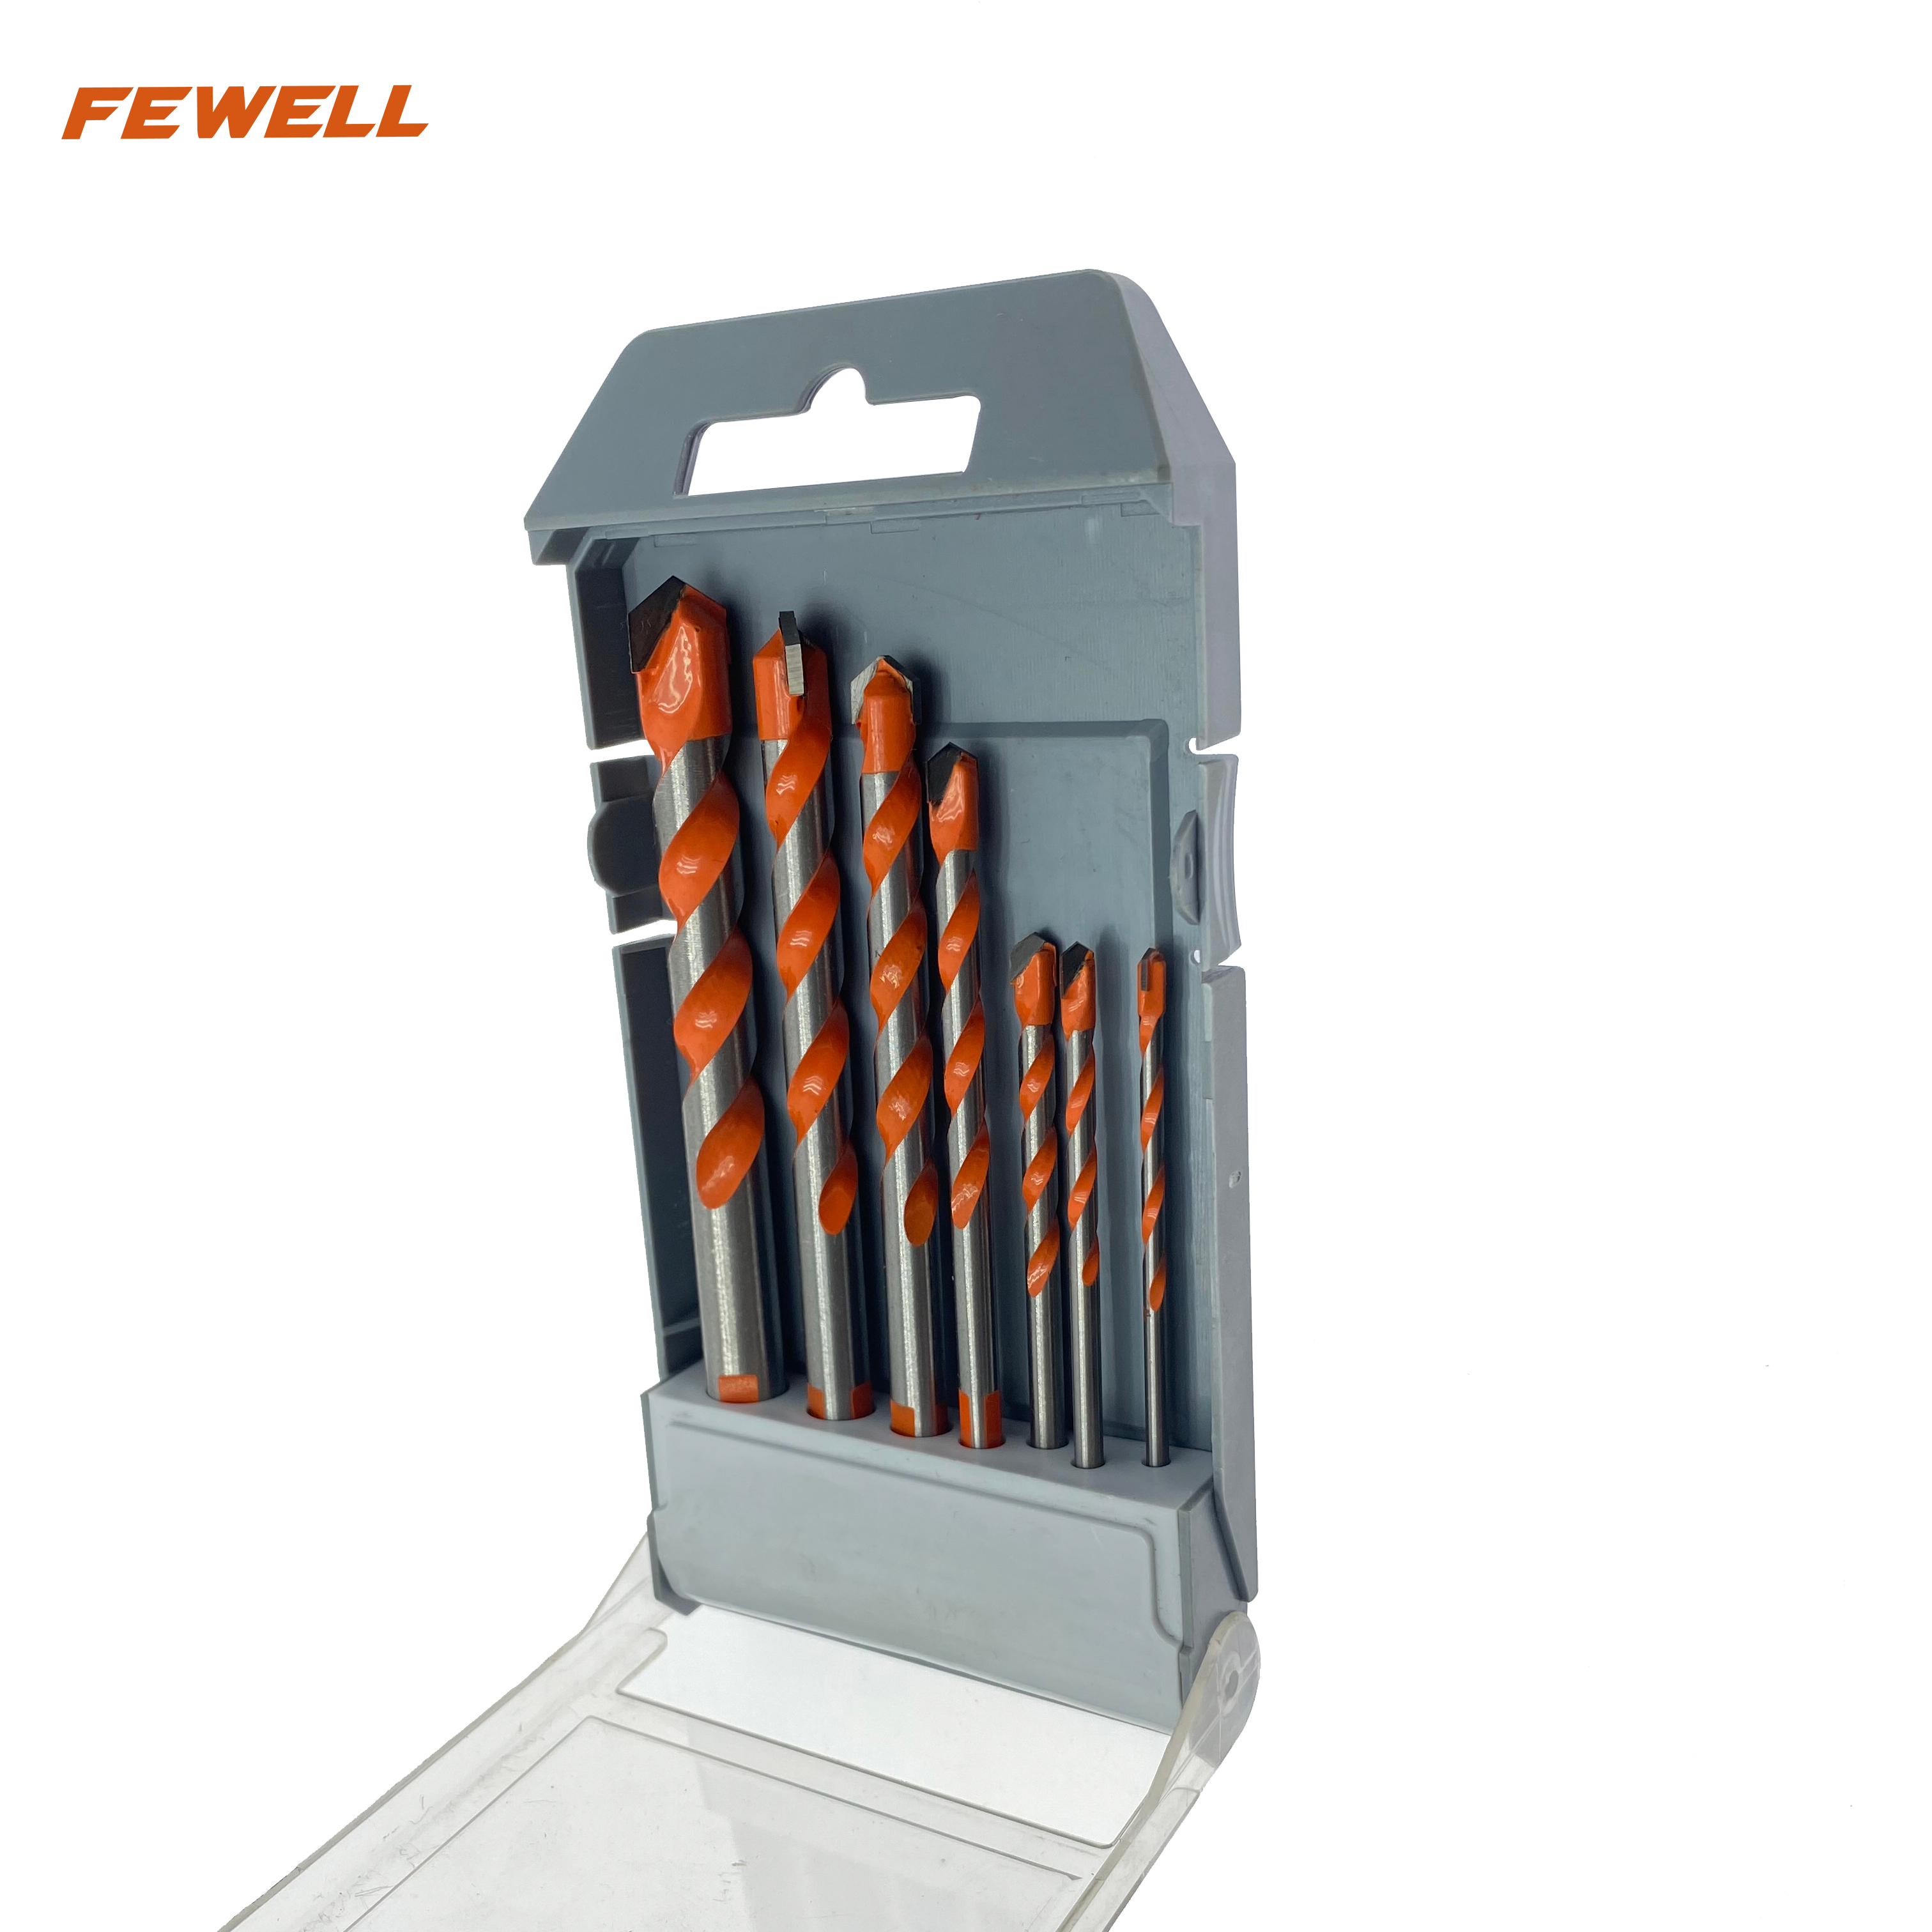 High quality 7pcs(3mm,4mm,5mm,6mm,8mm,10mm,12mm) Triangle handle spiral multifunction drill bit general purpose